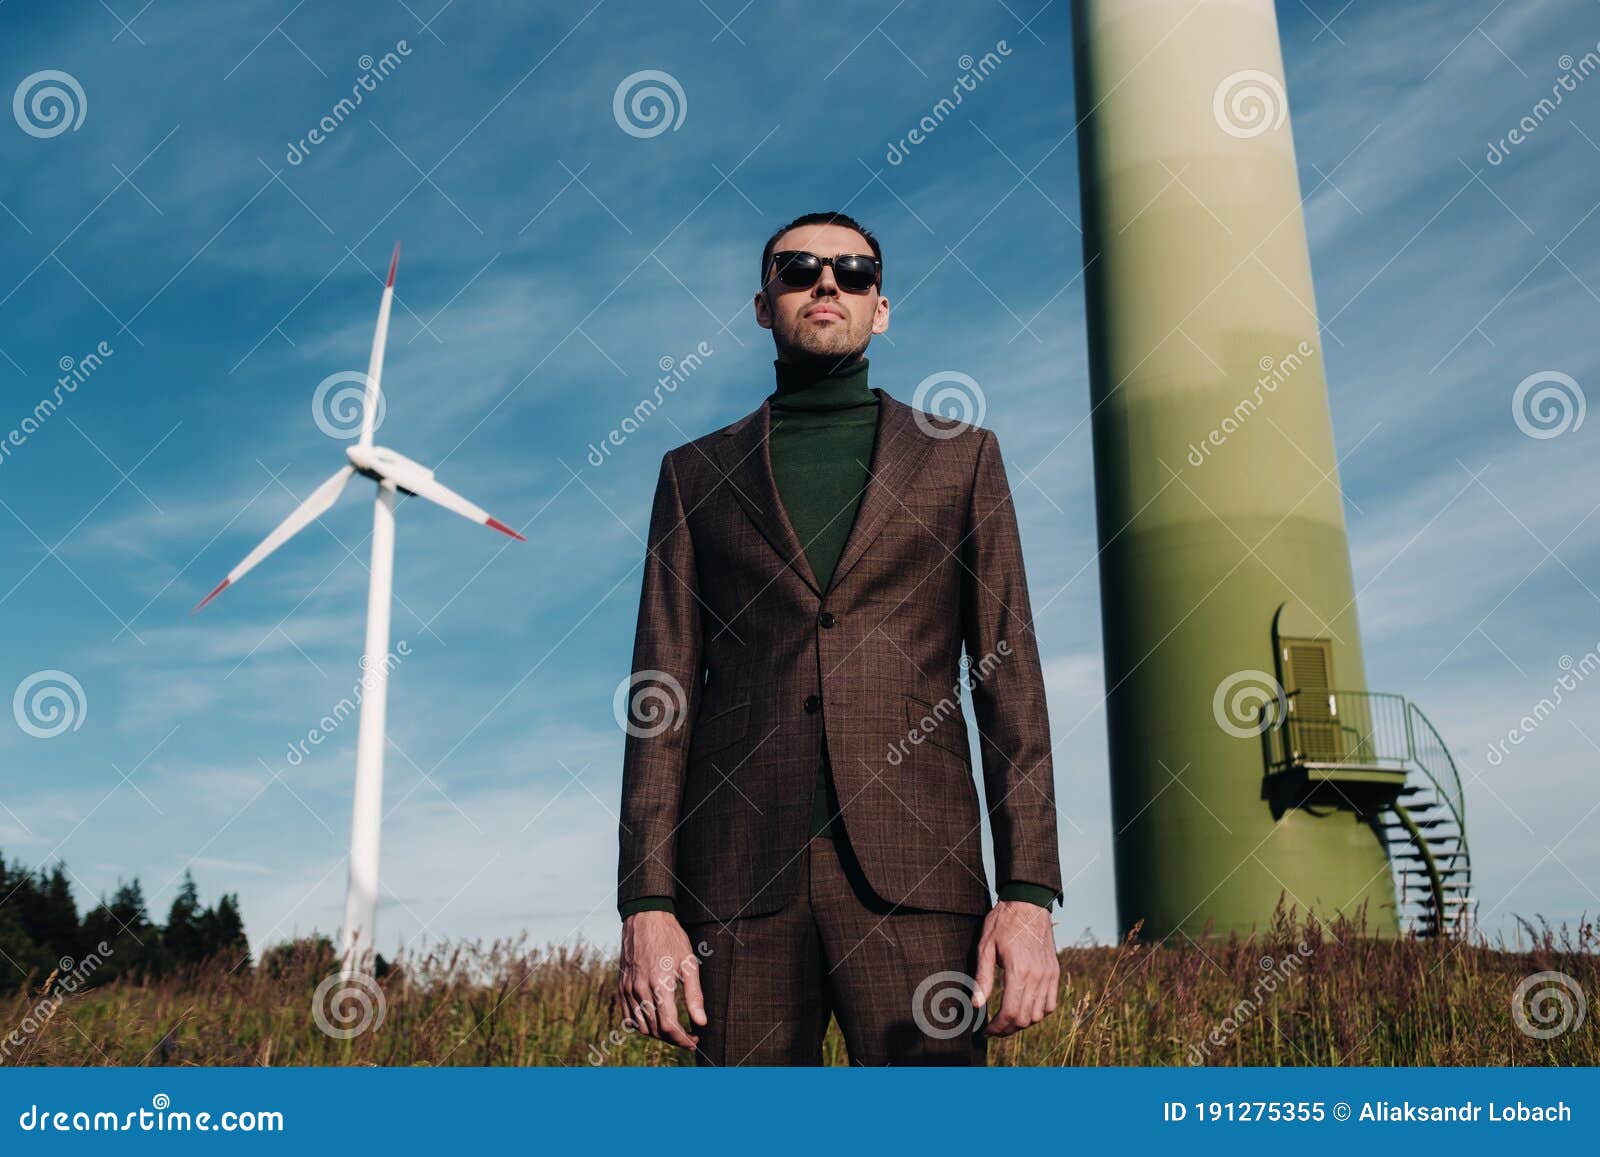 A Man in a Business Suit with a Green Golf Shirt Stands Next To a ...